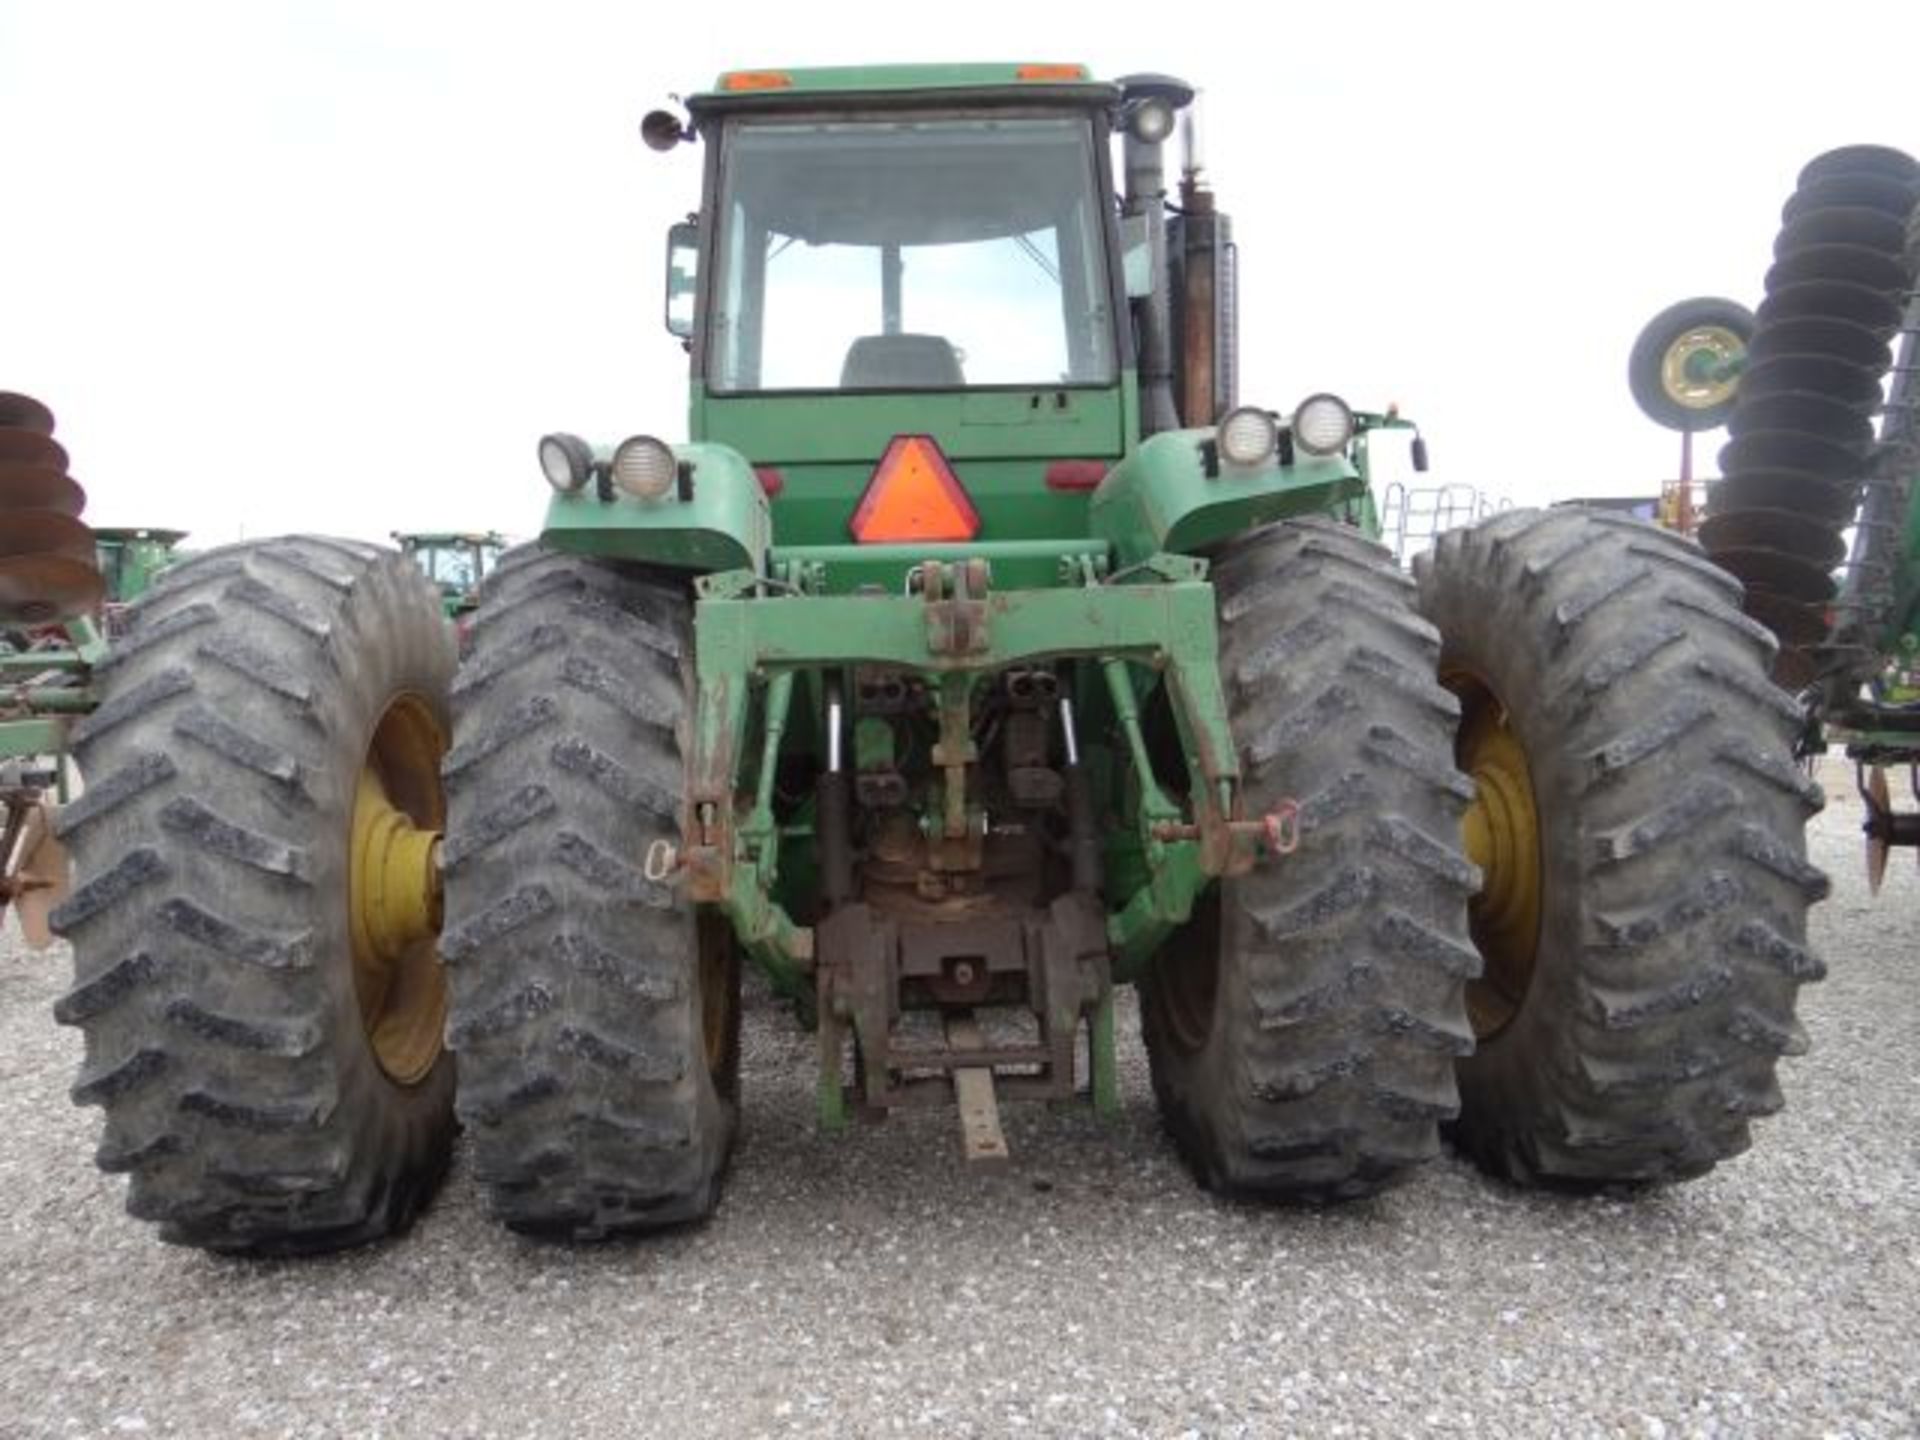 JD 8650 Tractor, 1982 #157562, 4wd, 3pt, Quick Hitch, Rear Pto, 4 Rear Scv, 20.8R-38 Tires Insides - Image 3 of 4